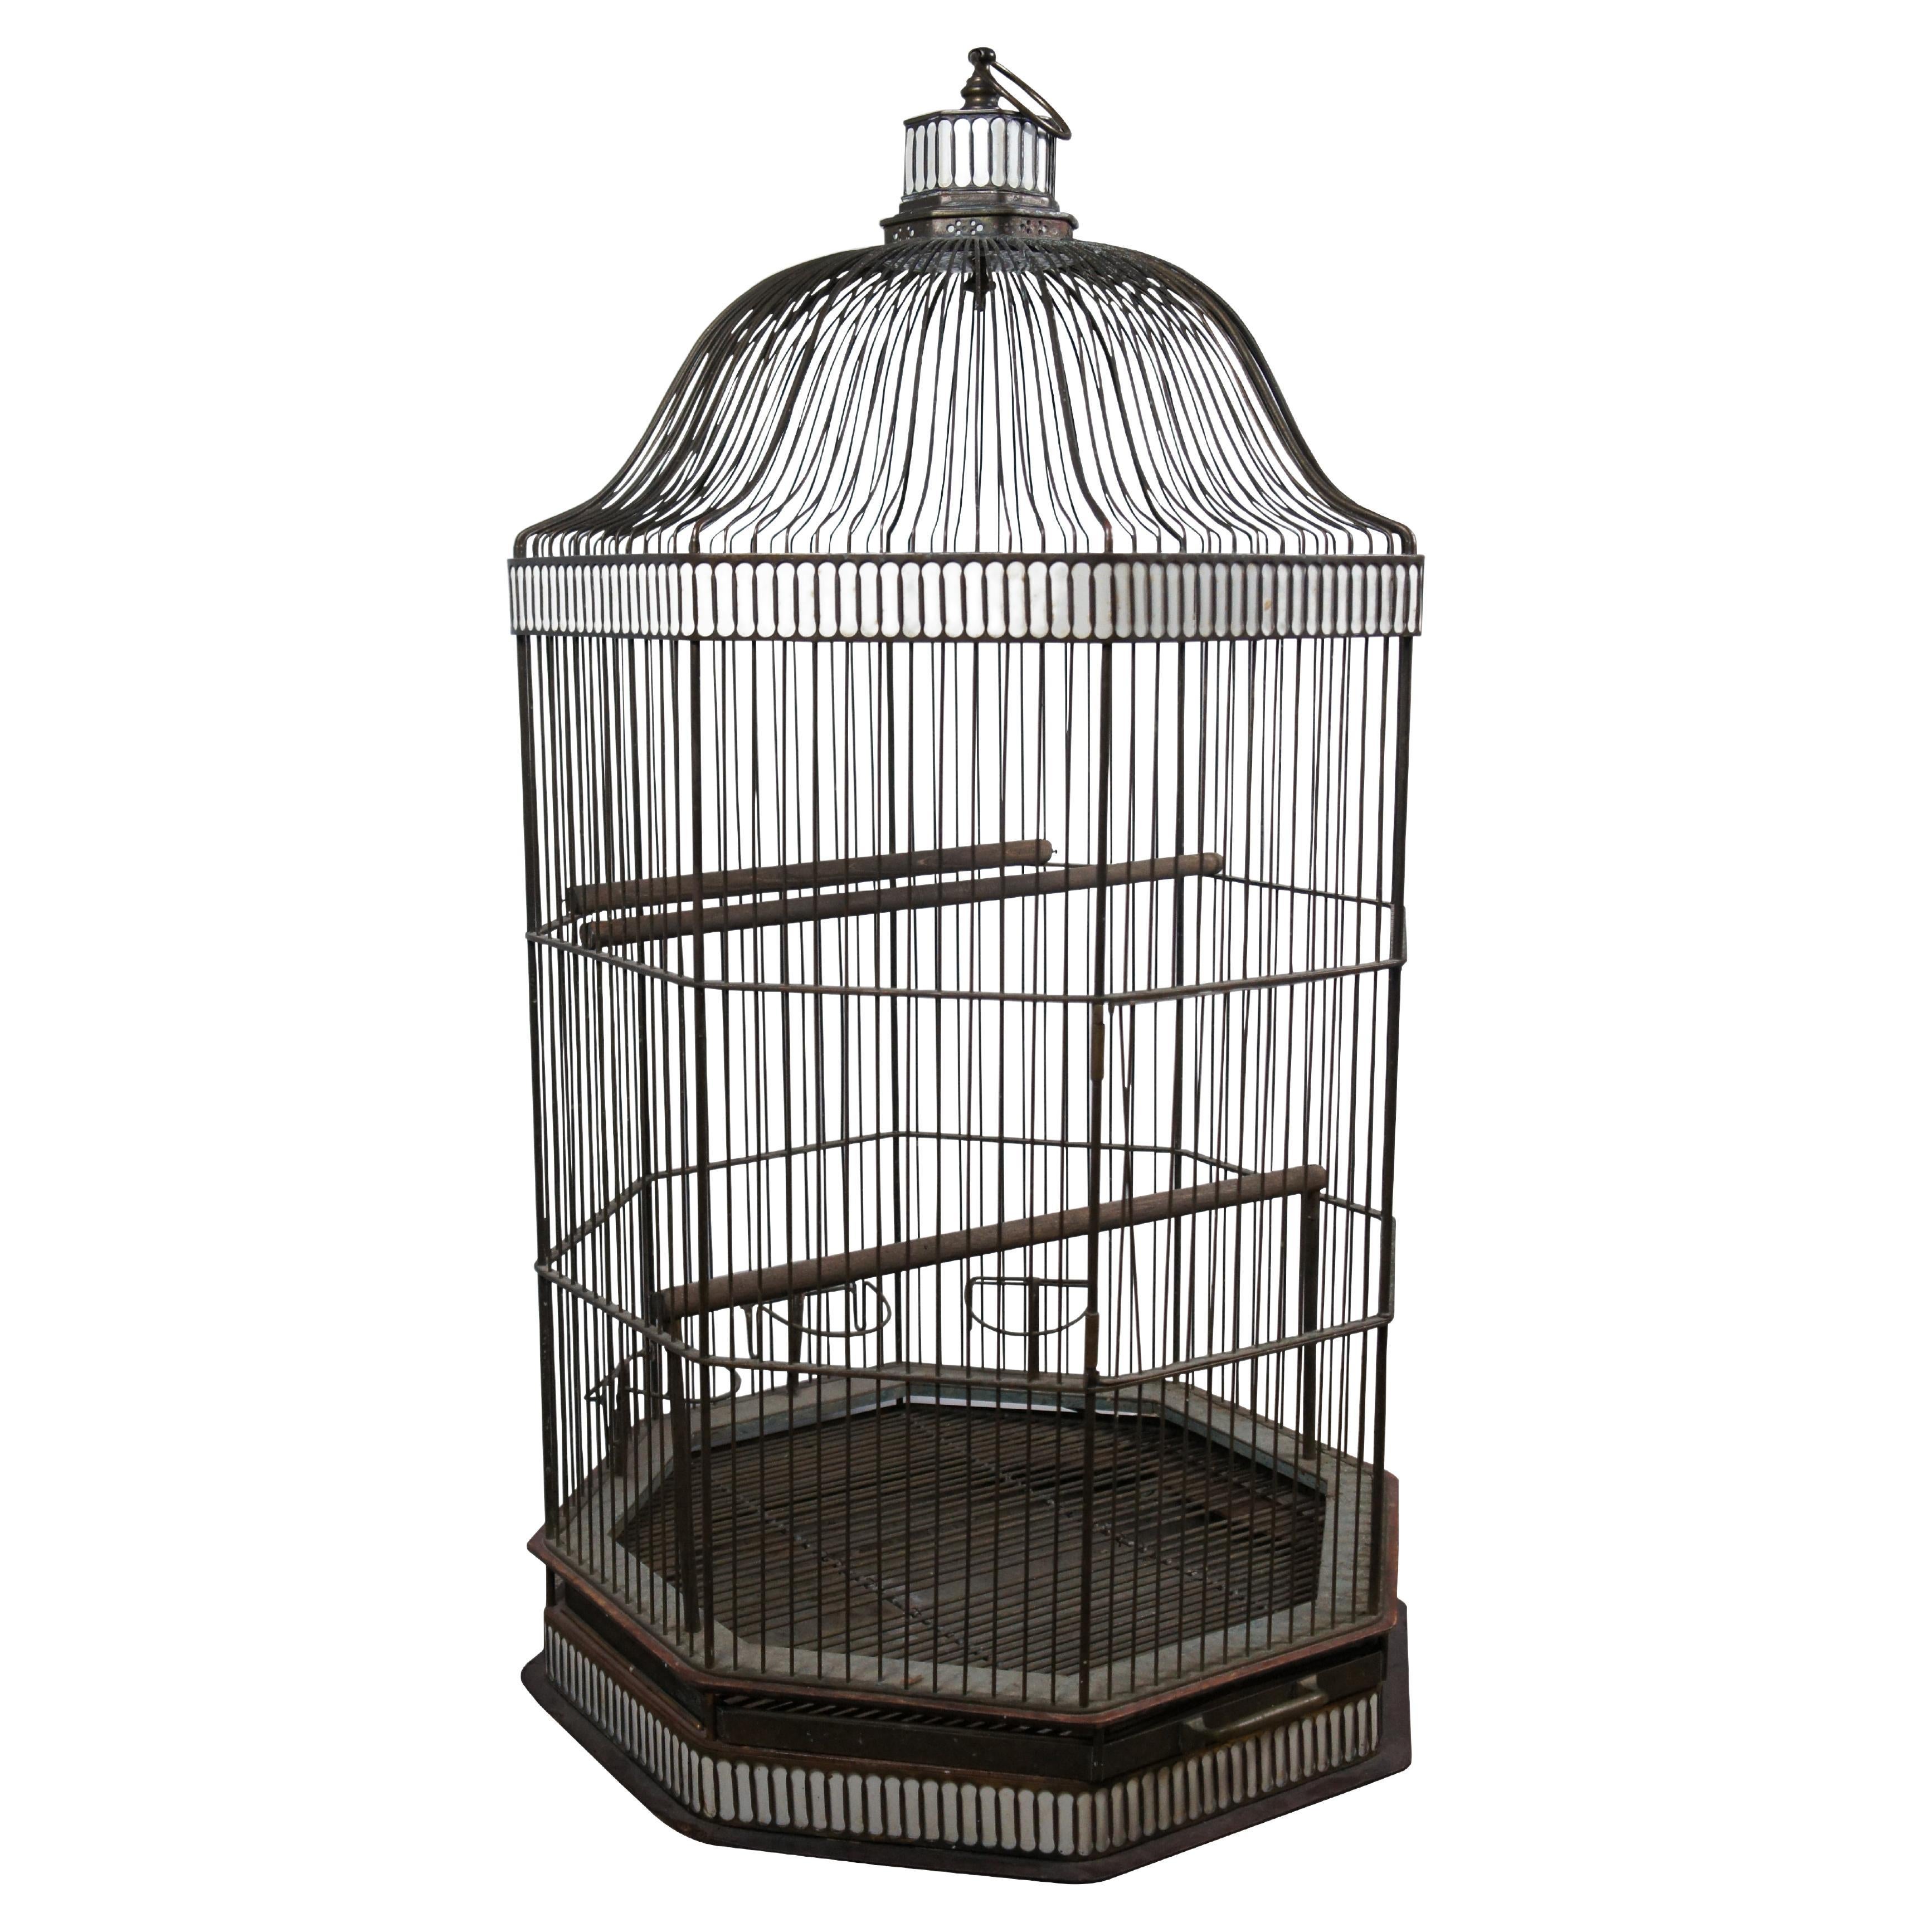 An impressive rare and monumental antique hanging brass bird cage. Octagonal form with dome top, three wooden perches (two movable), three dish stands, and removable lower grate. White inlaid bands around base, below dome, and around